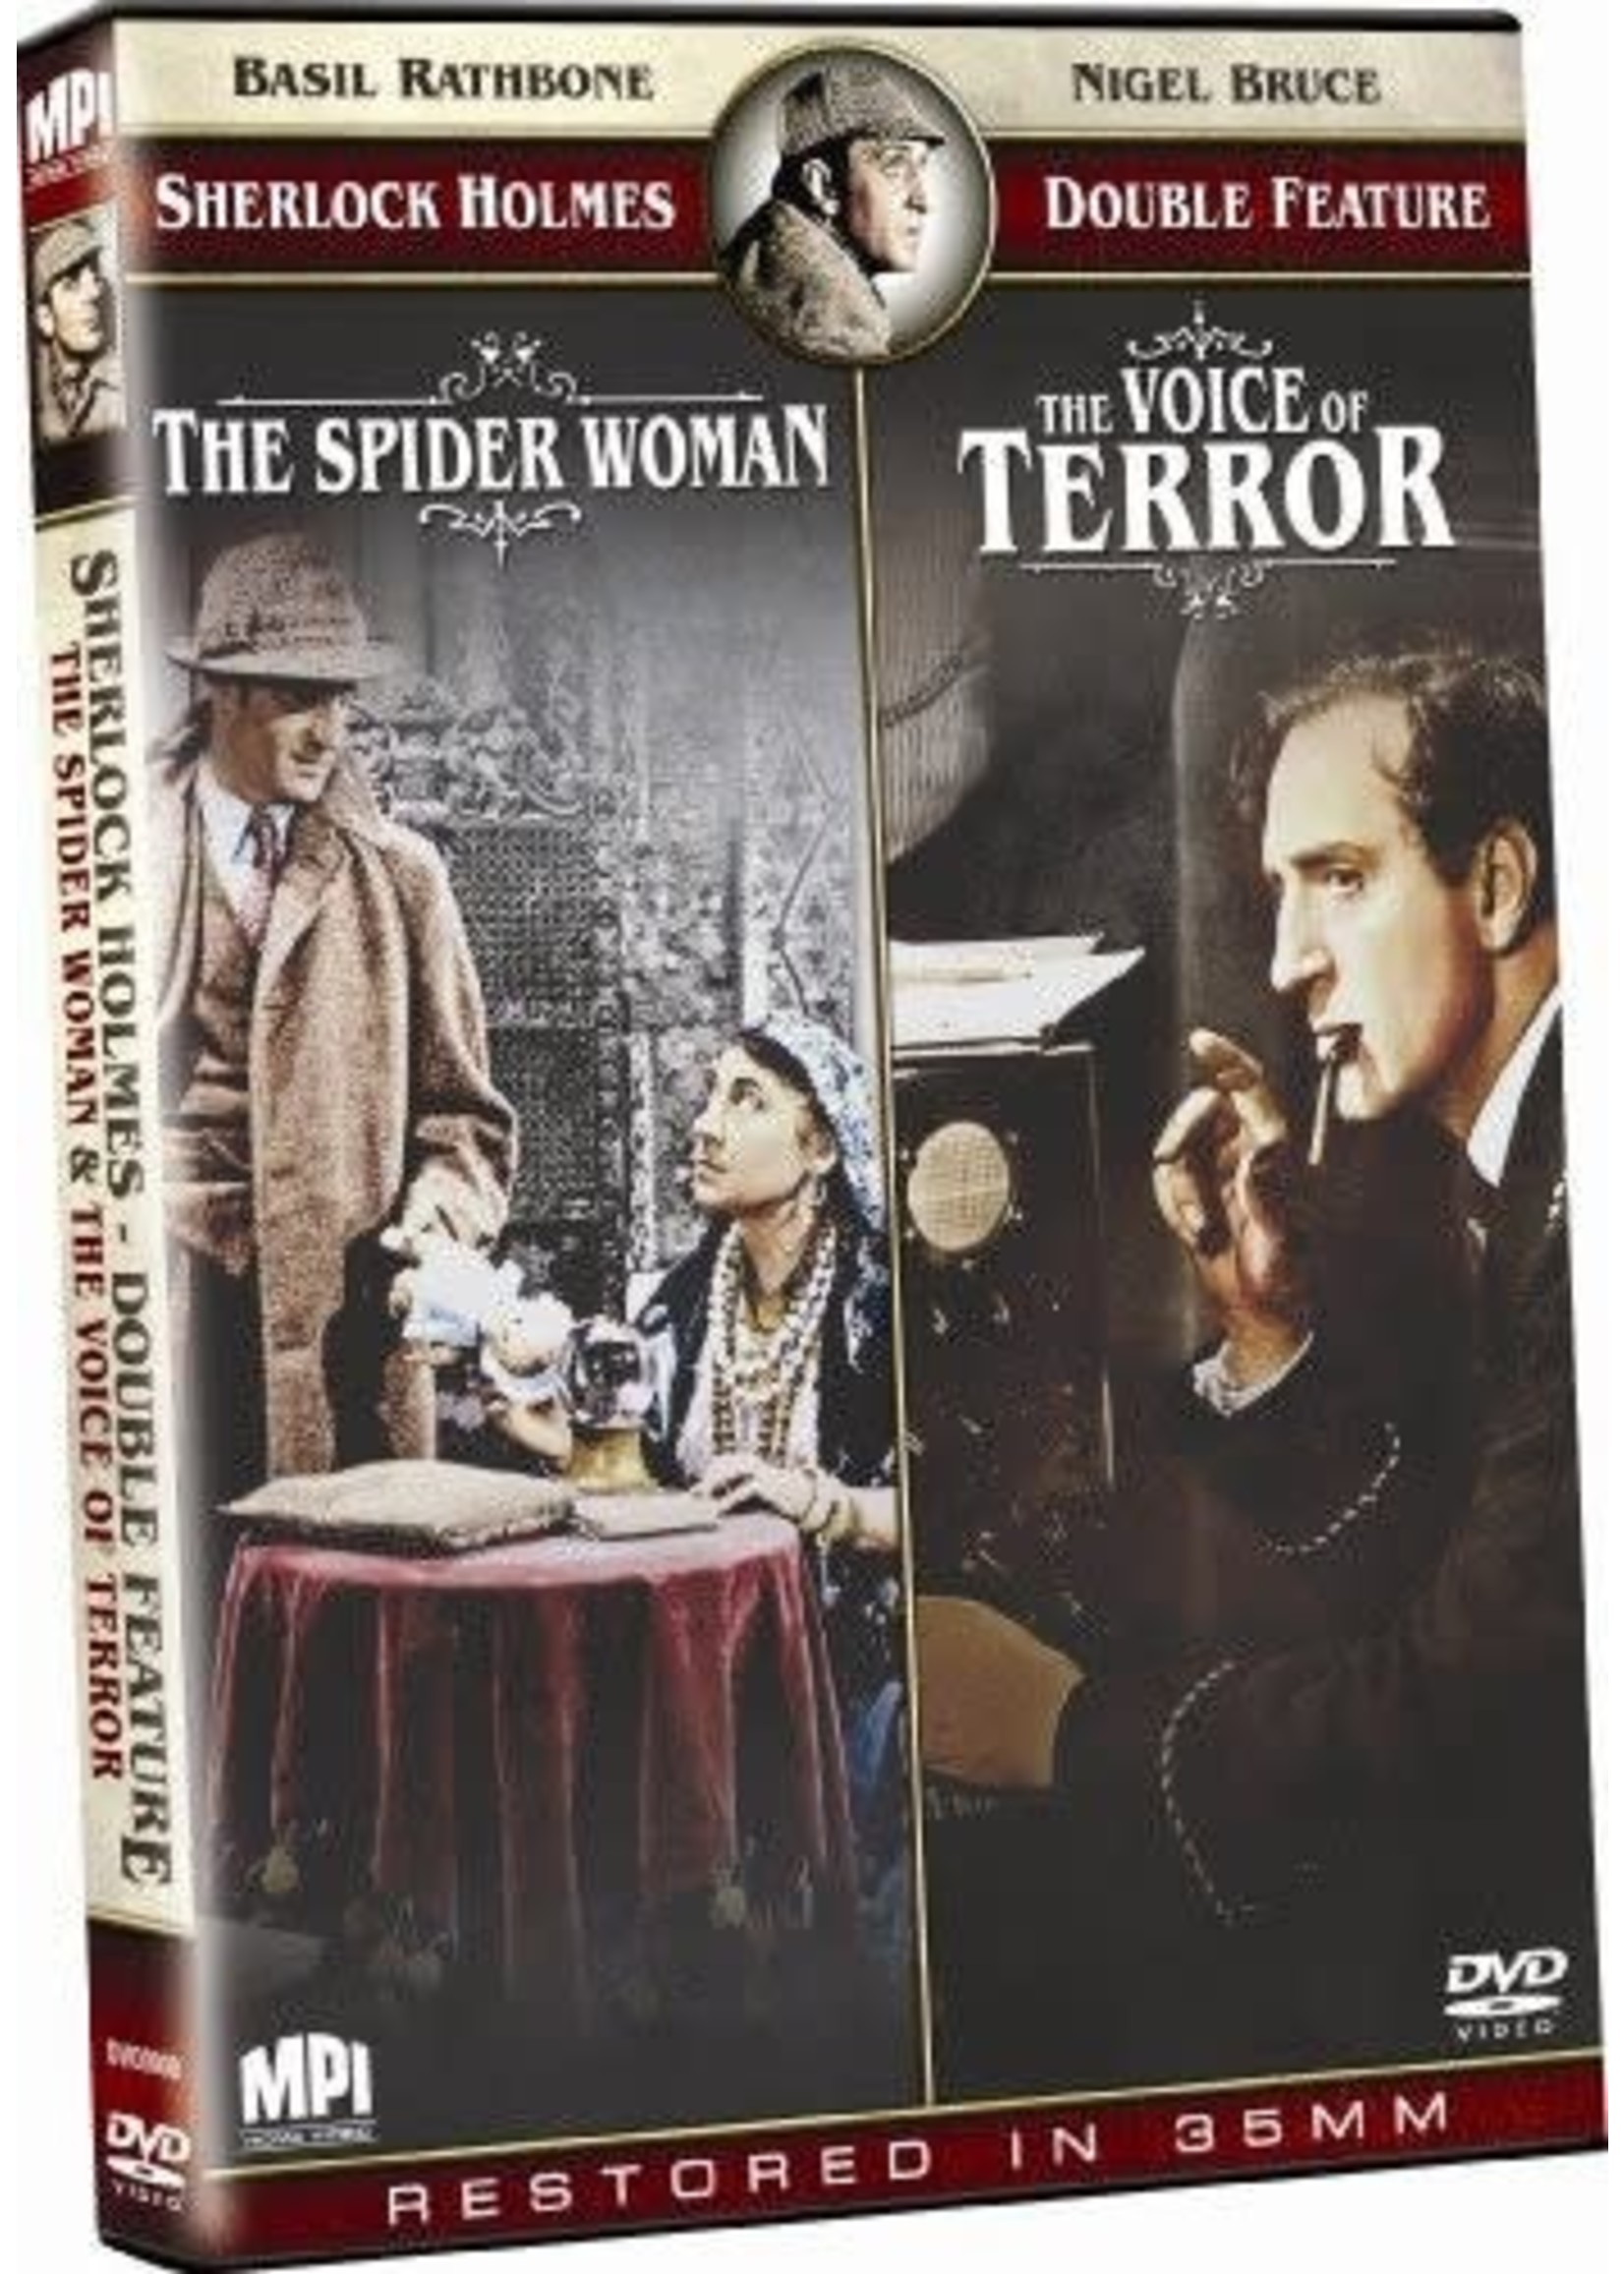 Sherlock Holmes Double Feature: the Spider Woman and Voice of Terror DVD